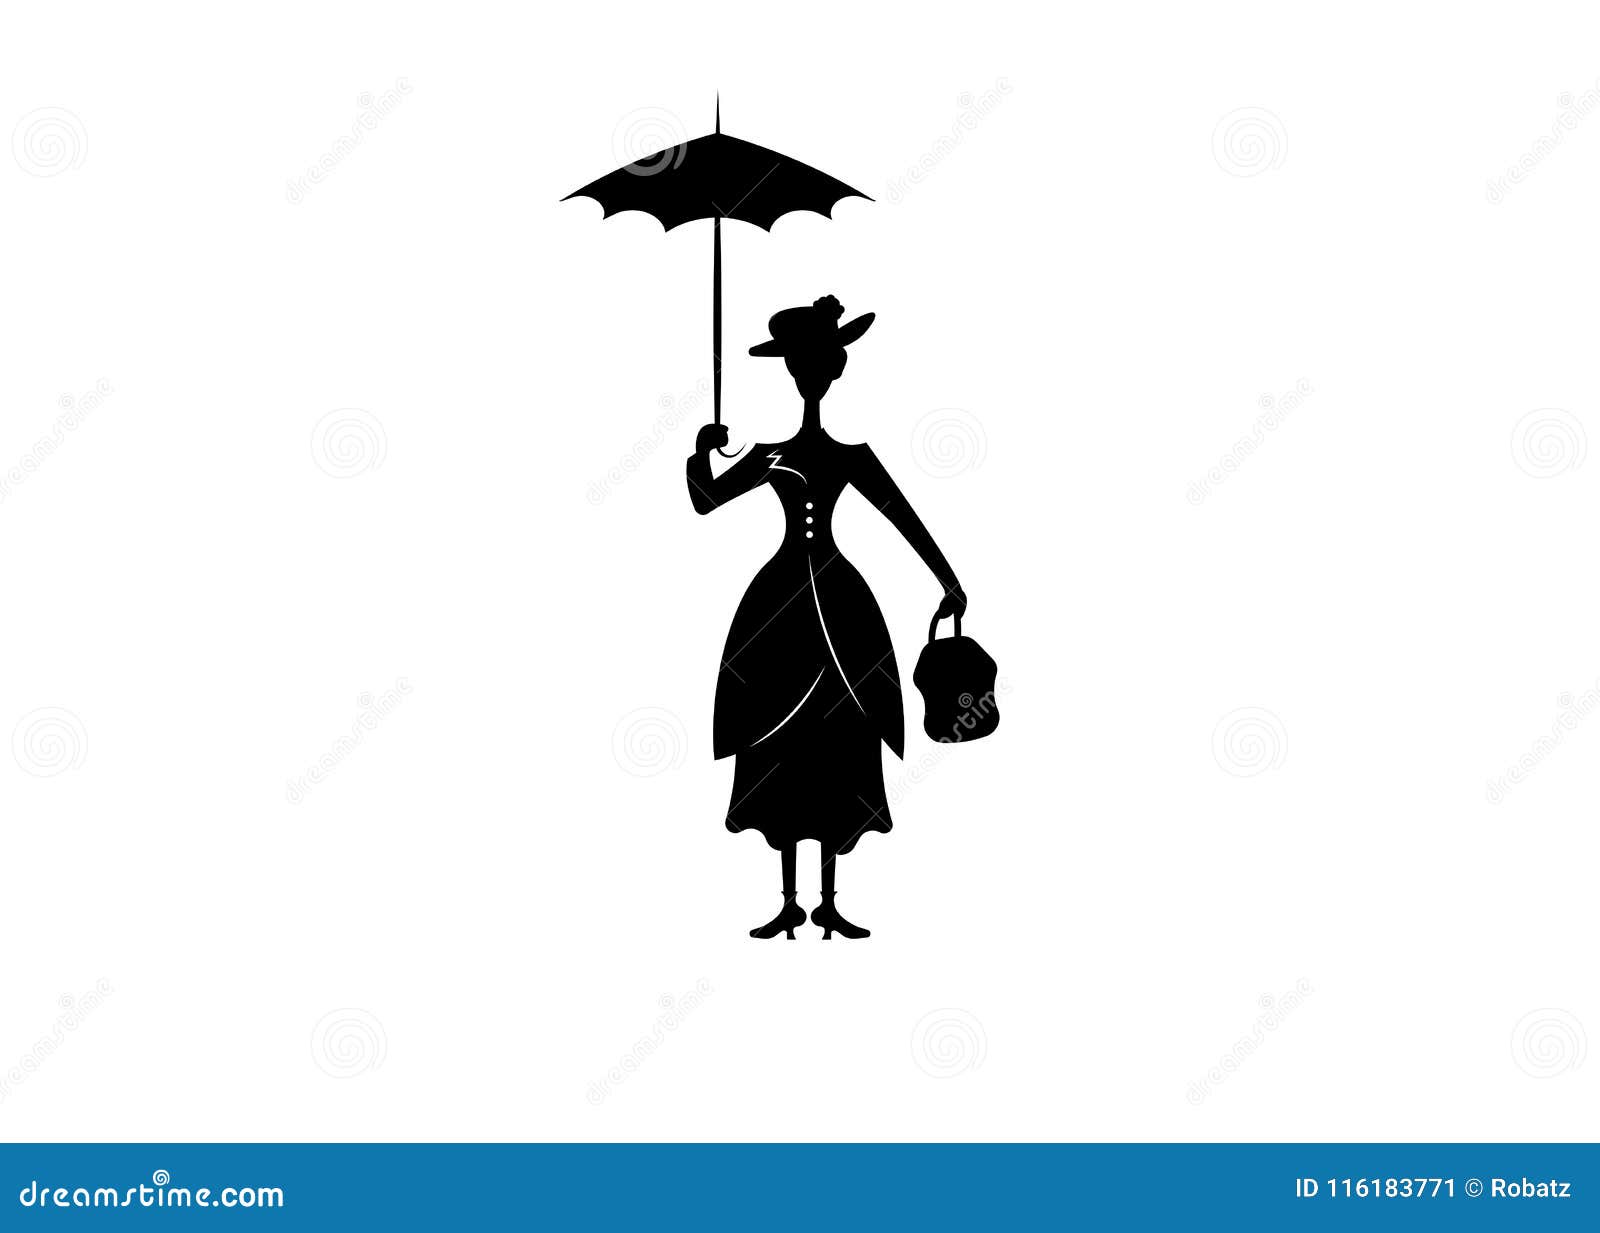 Silhouette Girl Floats with Umbrella in His Hand, Mary Poppins Style ... Dancing With Umbrella Silhouette